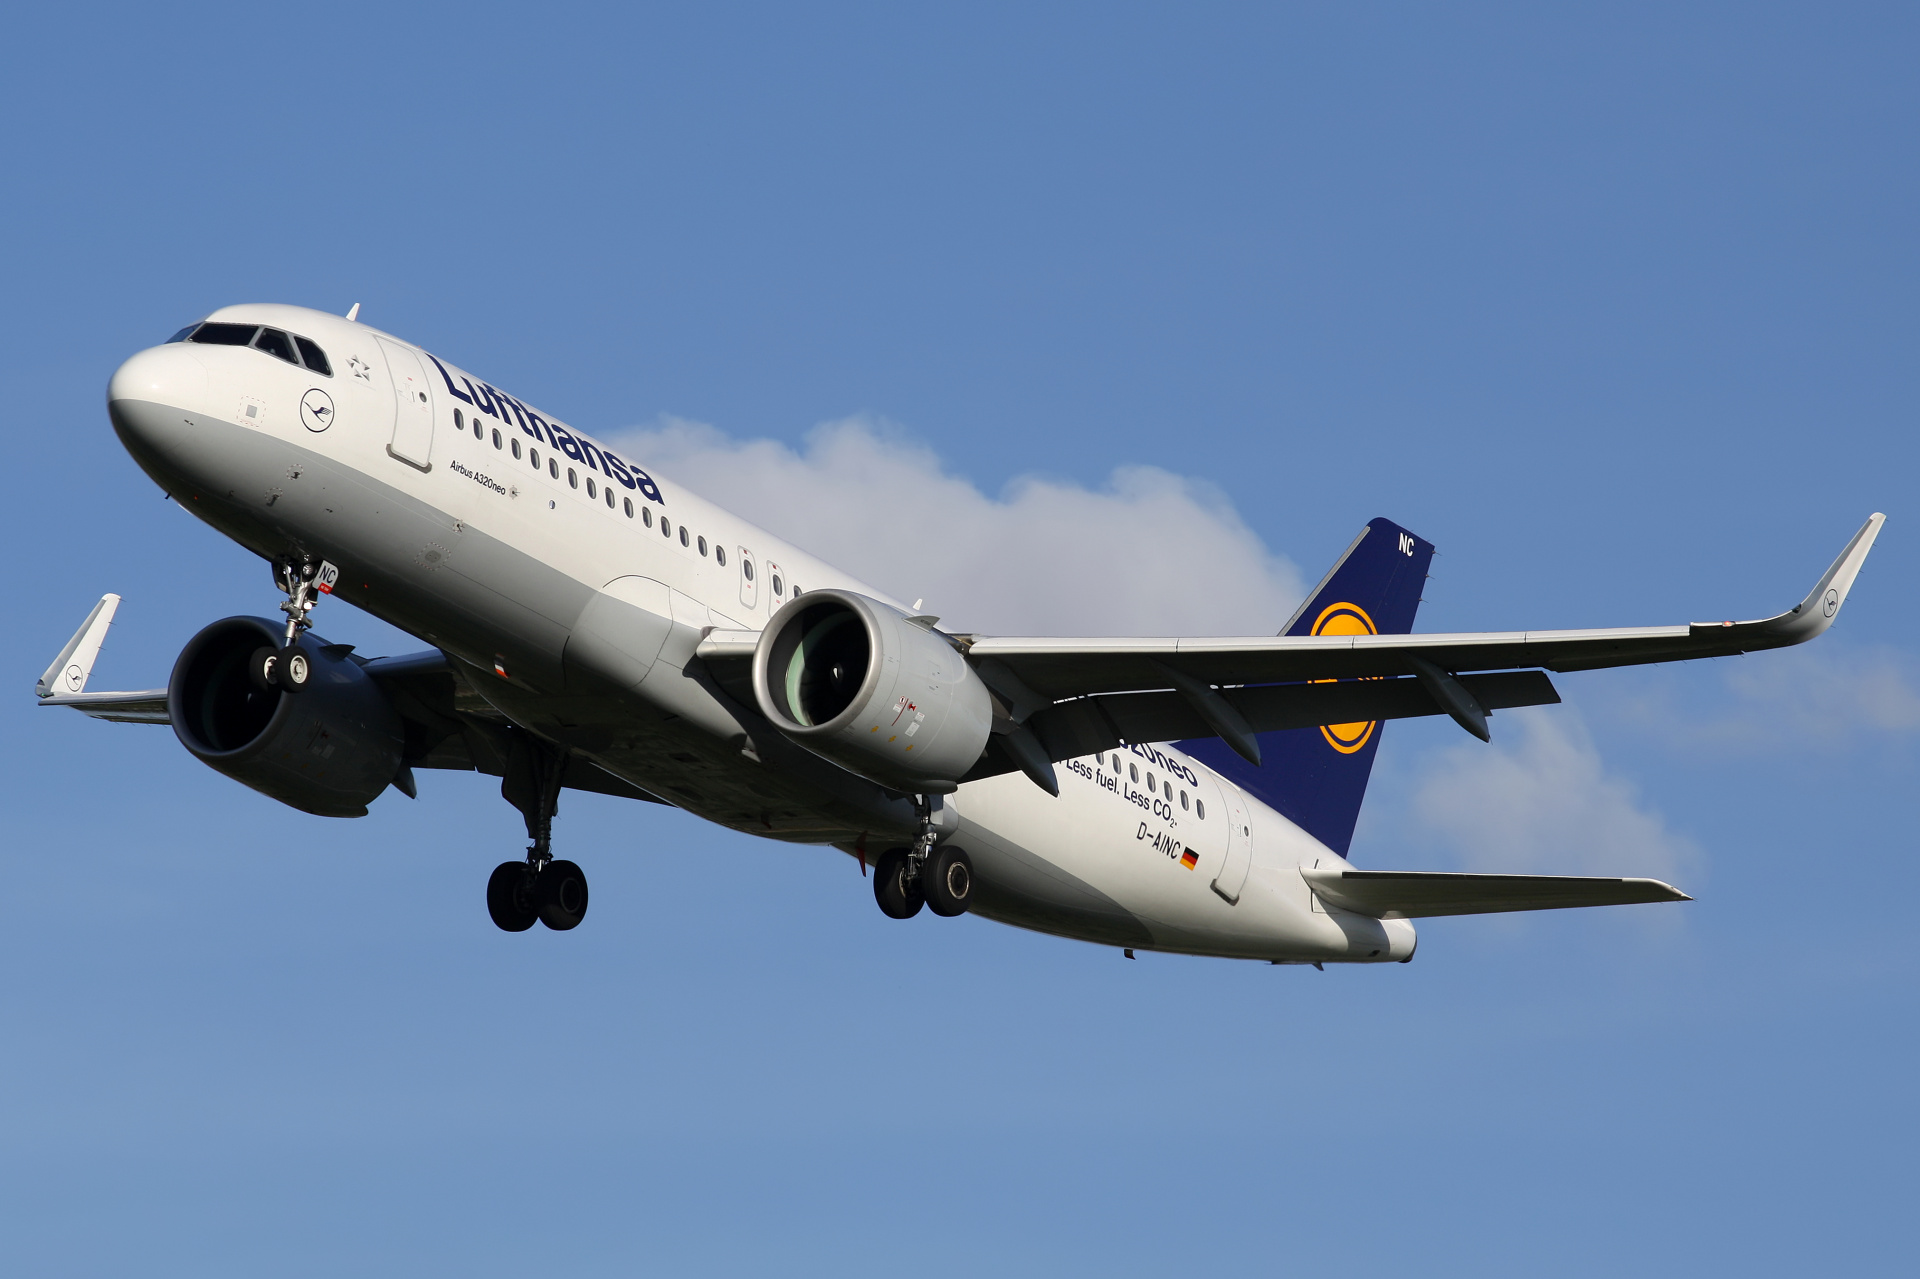 D-AINC (First to fly livery) (Aircraft » EPWA Spotting » Airbus A320neo » Lufthansa)